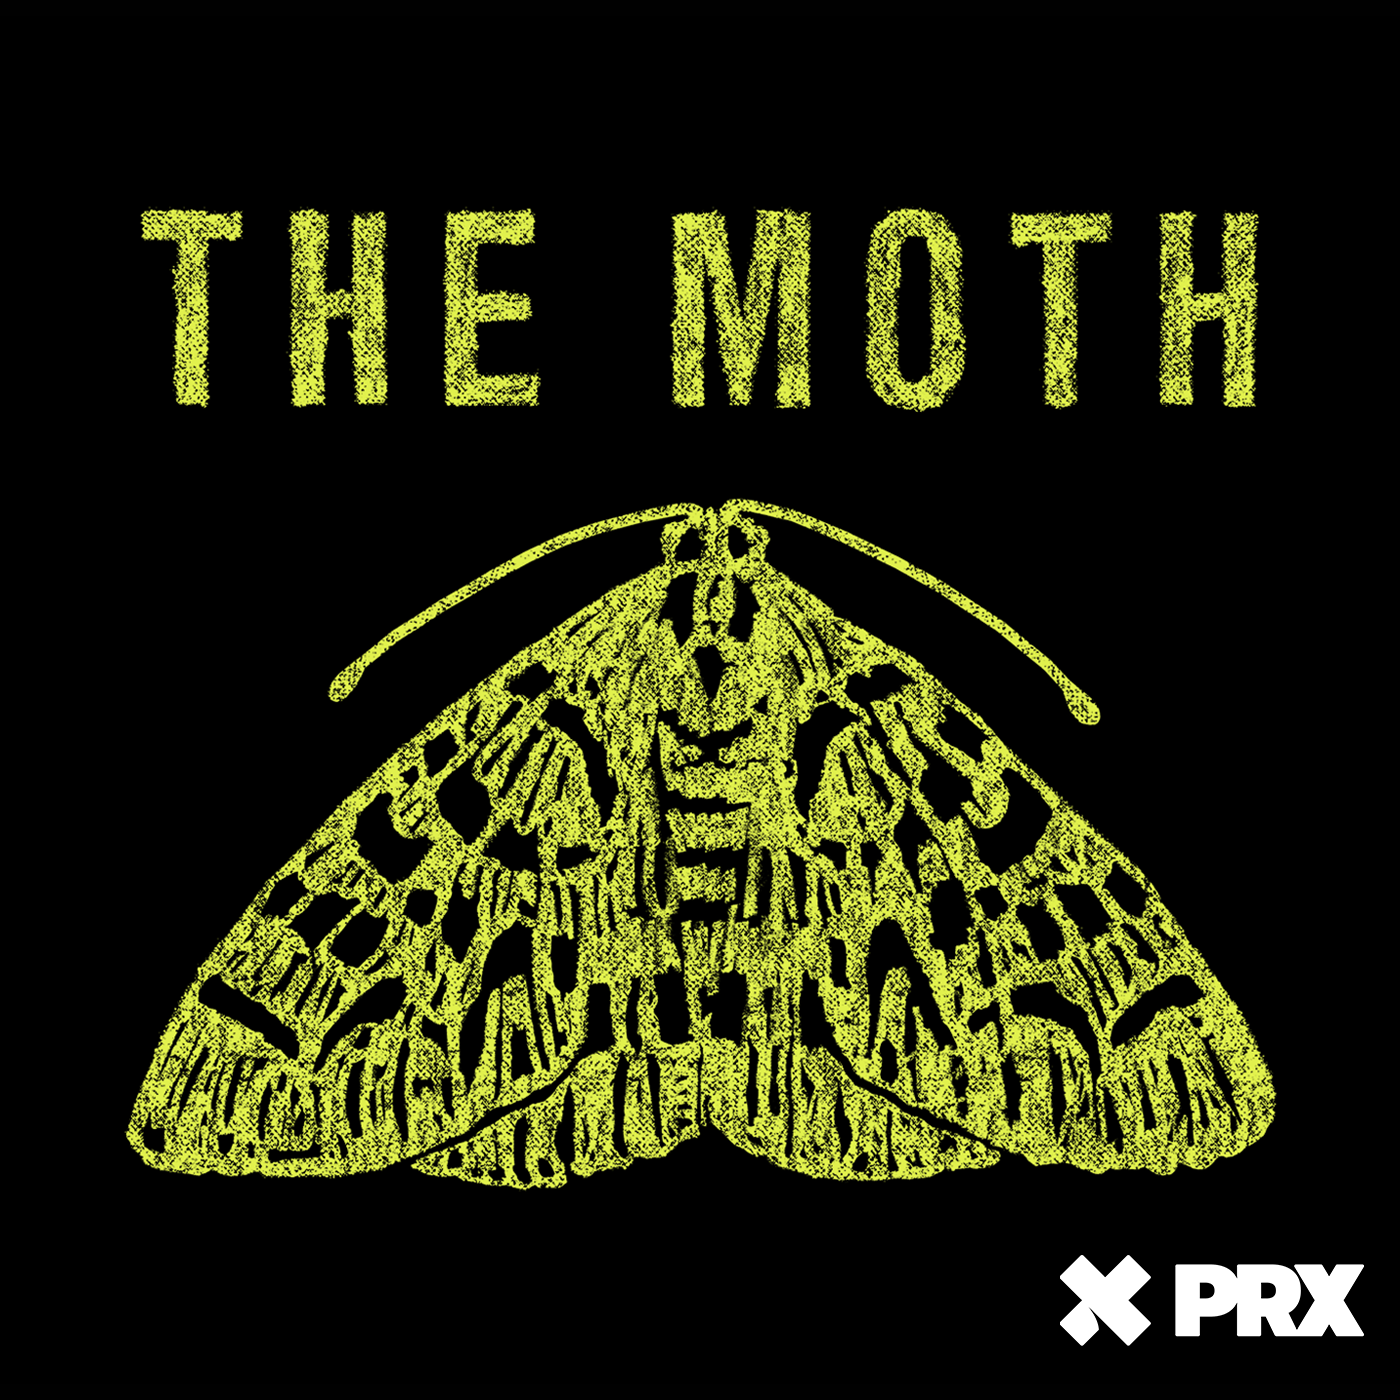 The Moth Radio Hour: Out of Step, Out of Place